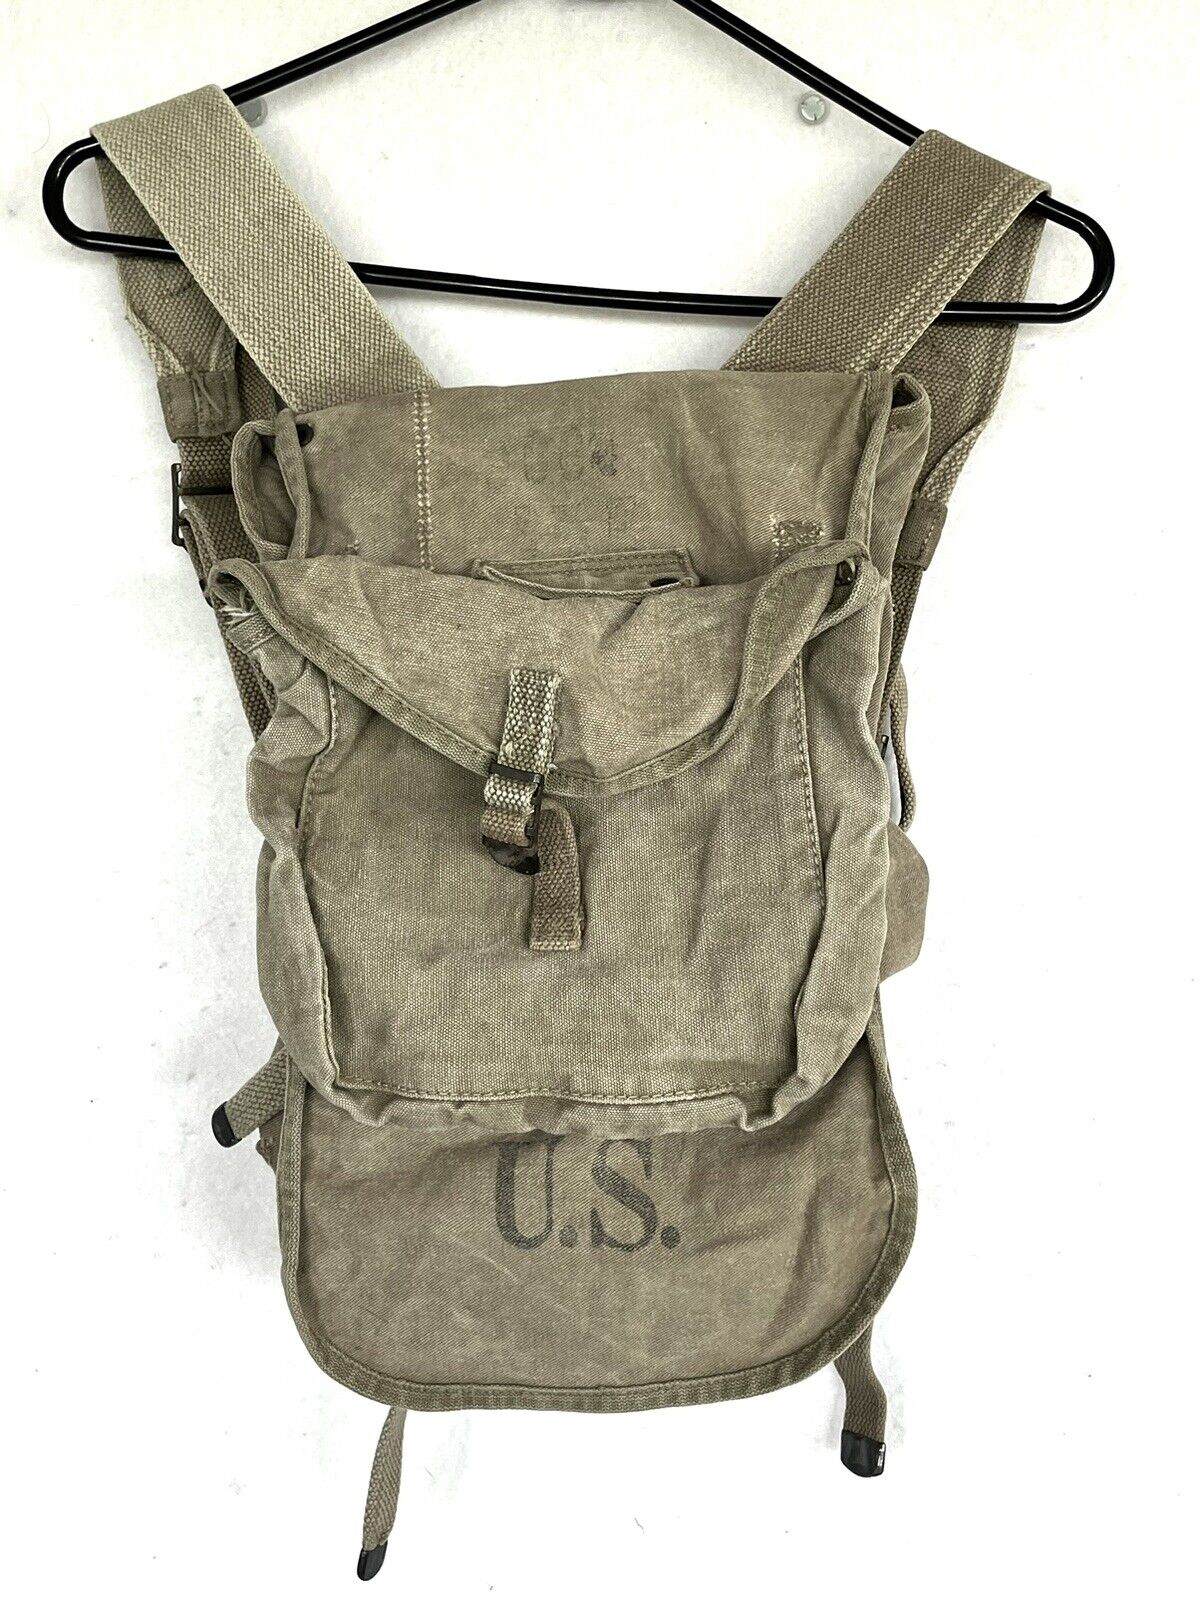 ORIGINAL WWII US ARMY M1928 COMBAT HAVERSACK FIELD BACKPACK 1942 Indianapolis